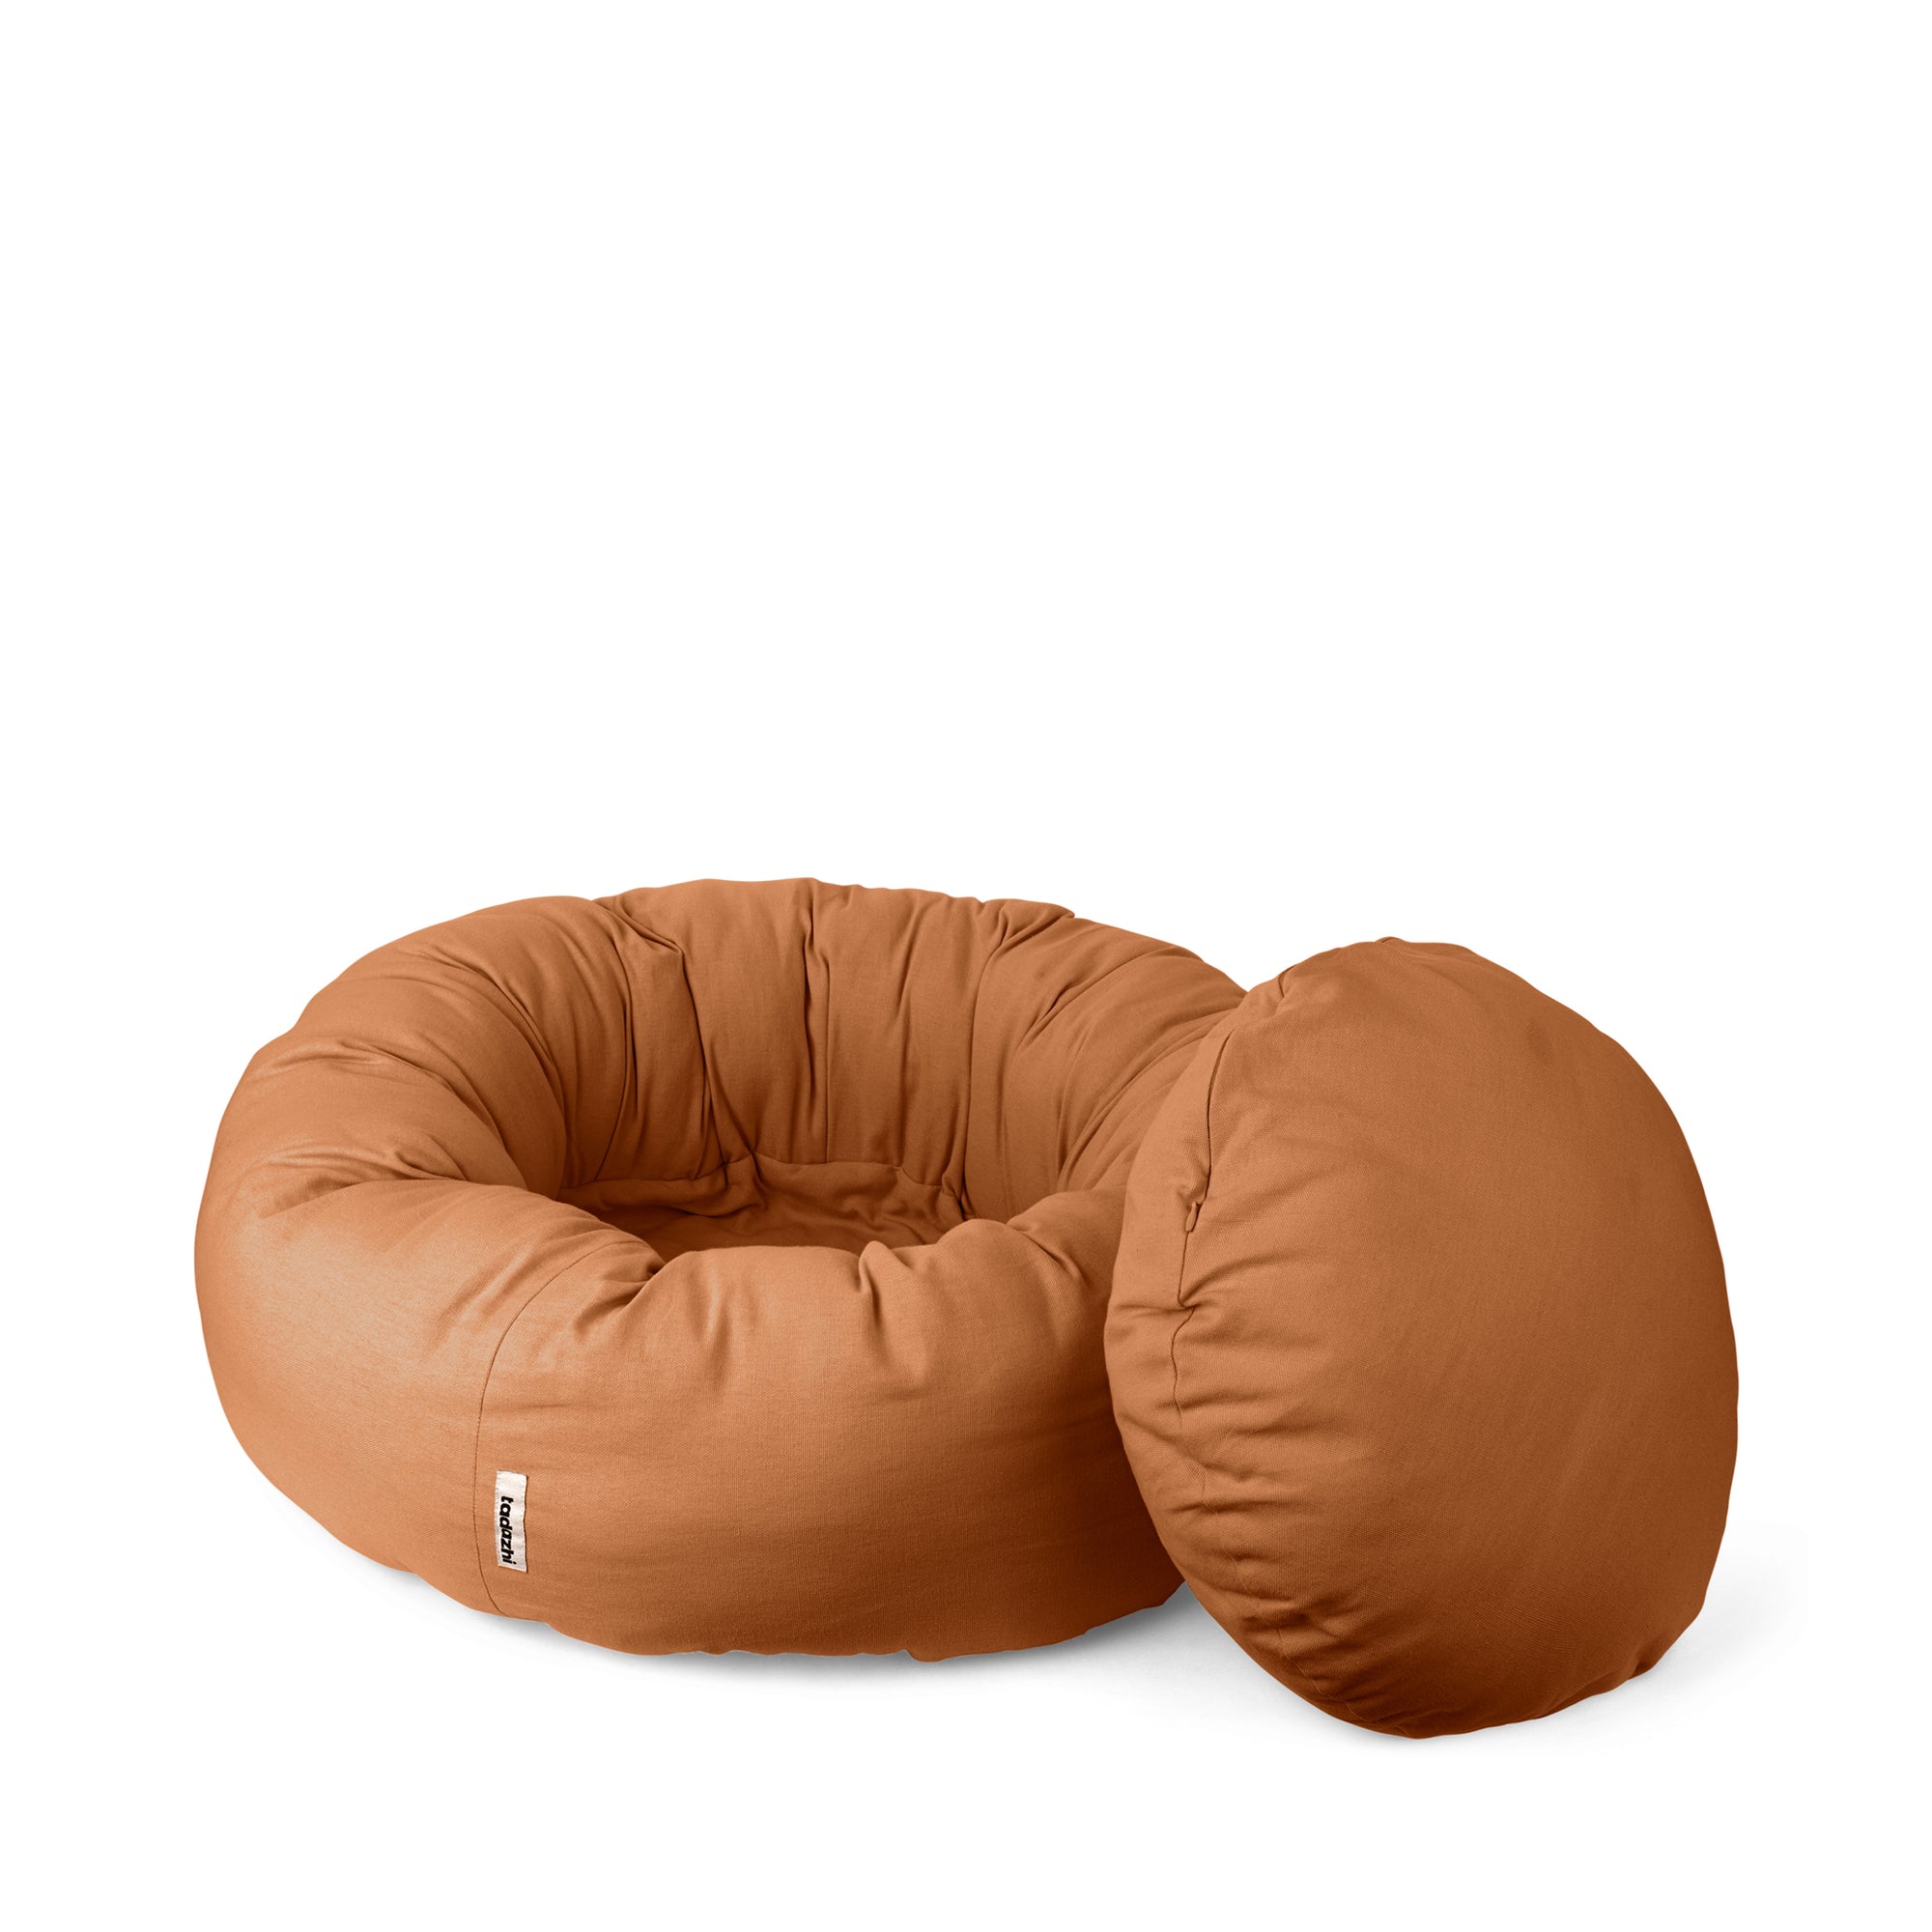 Donut bed in light brown